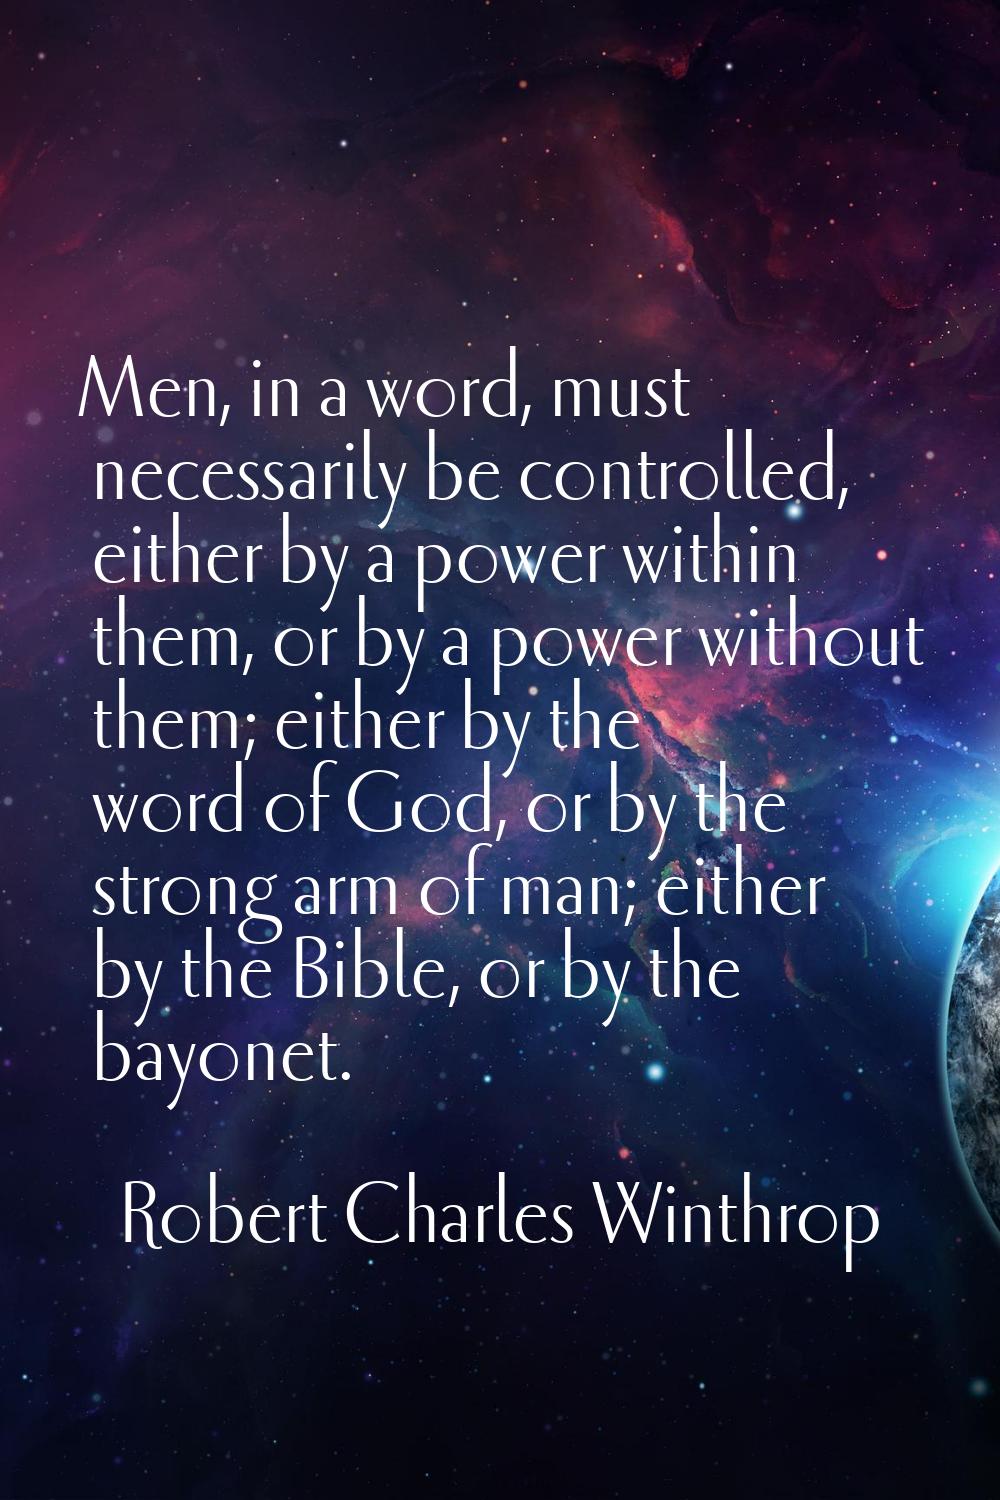 Men, in a word, must necessarily be controlled, either by a power within them, or by a power withou